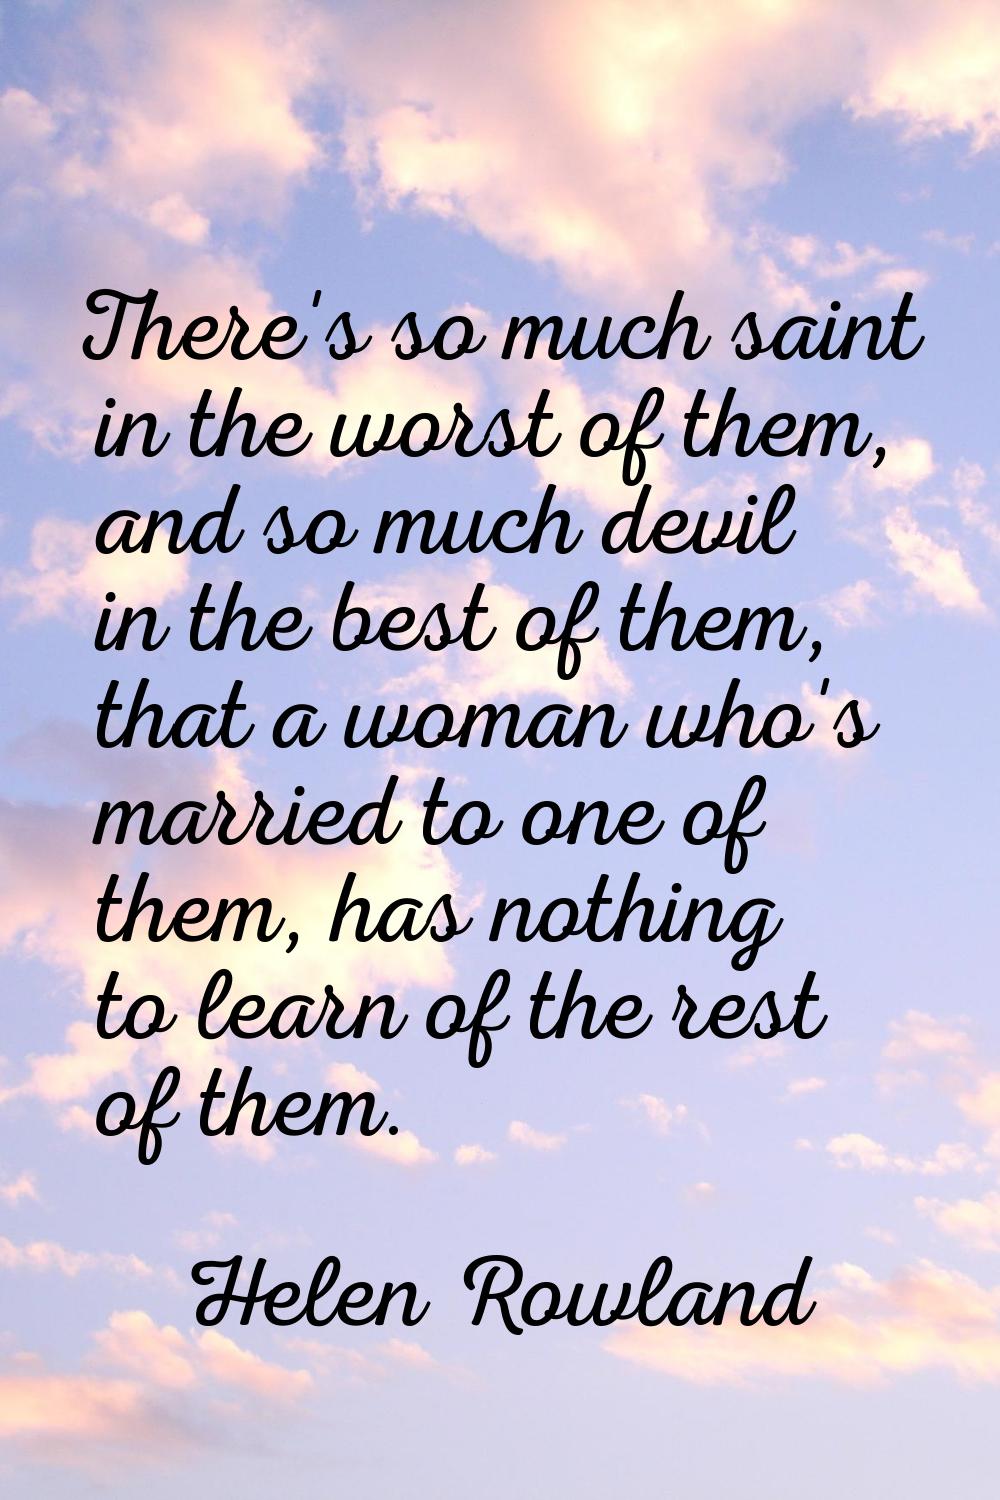 There's so much saint in the worst of them, and so much devil in the best of them, that a woman who